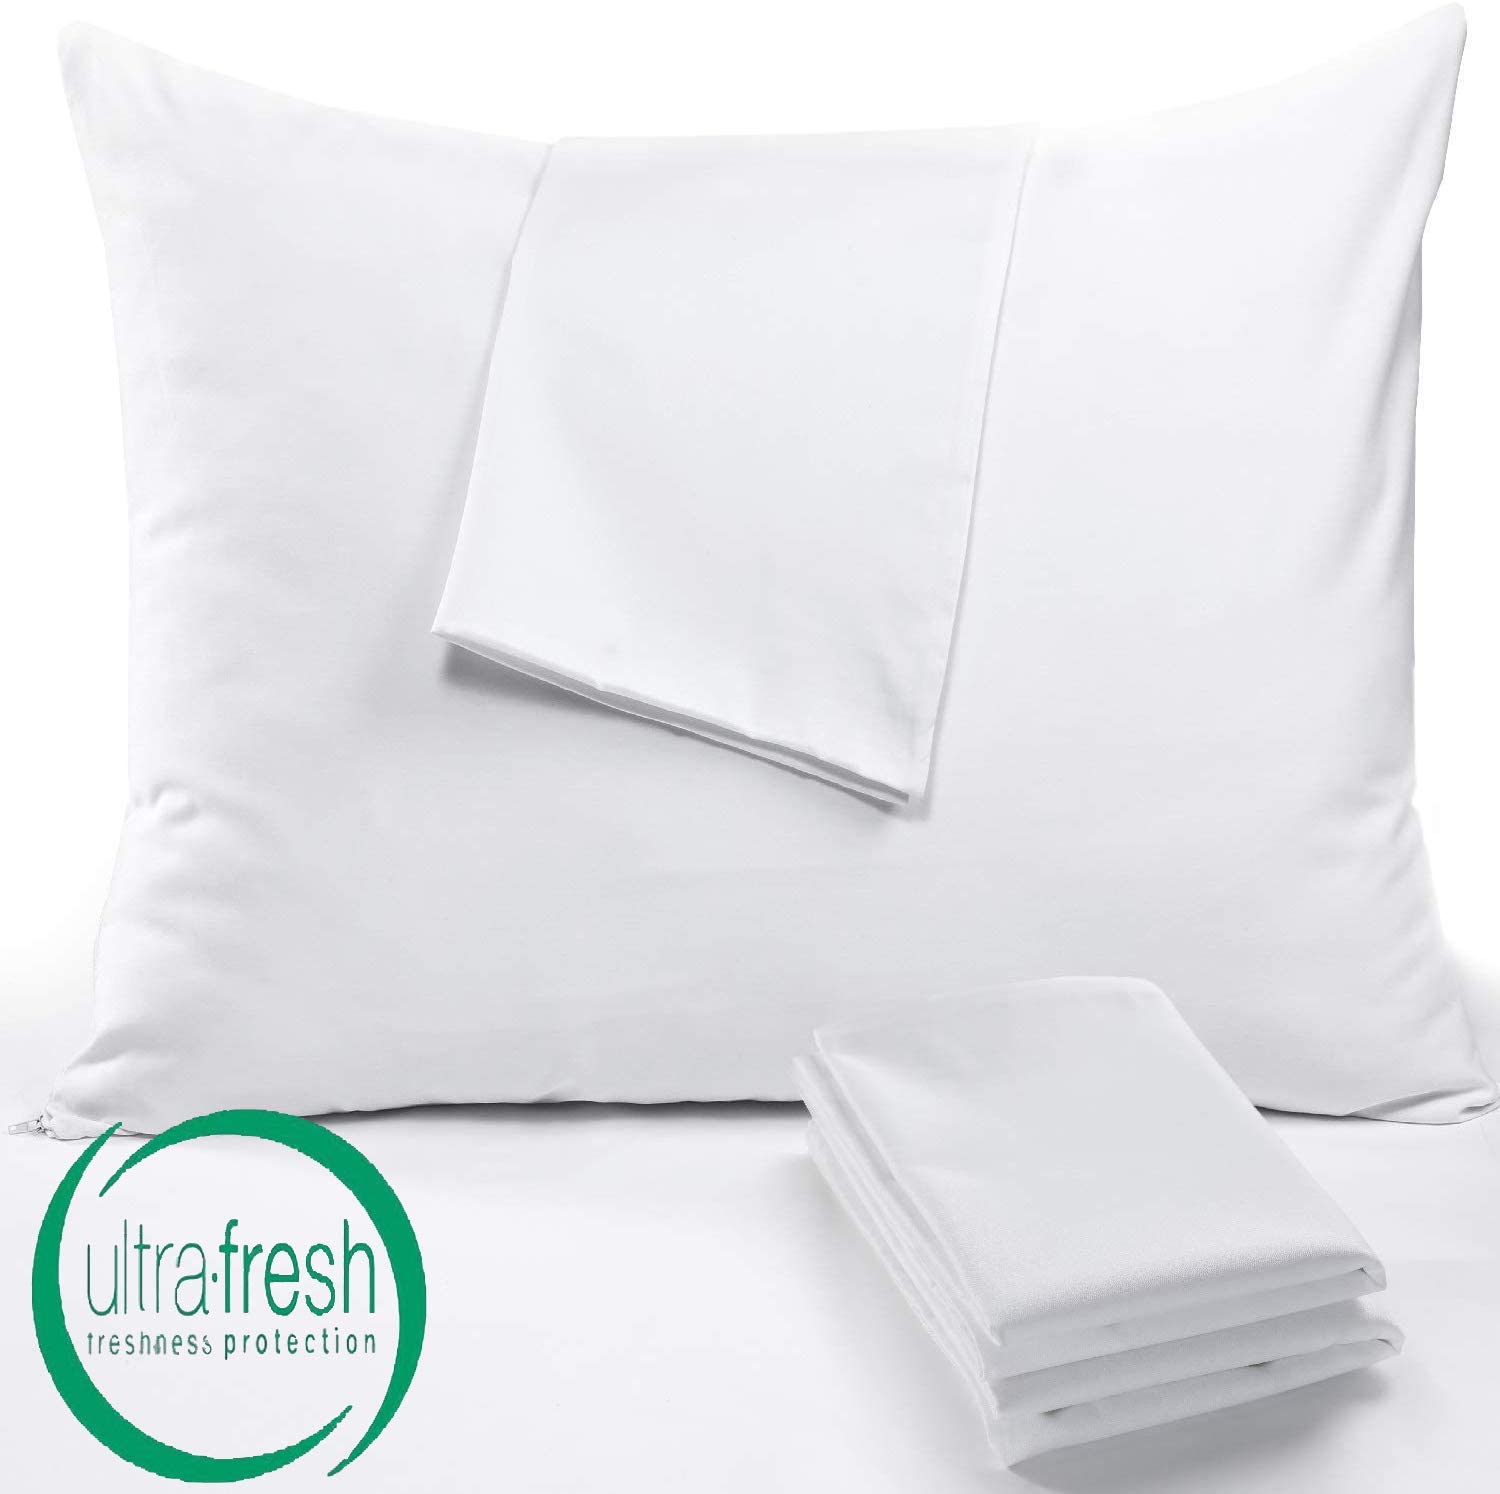 Soft and silky cotton sateen zippered pillow covers to keep your pillow clean and protect  from dust-mites and unwanted stains